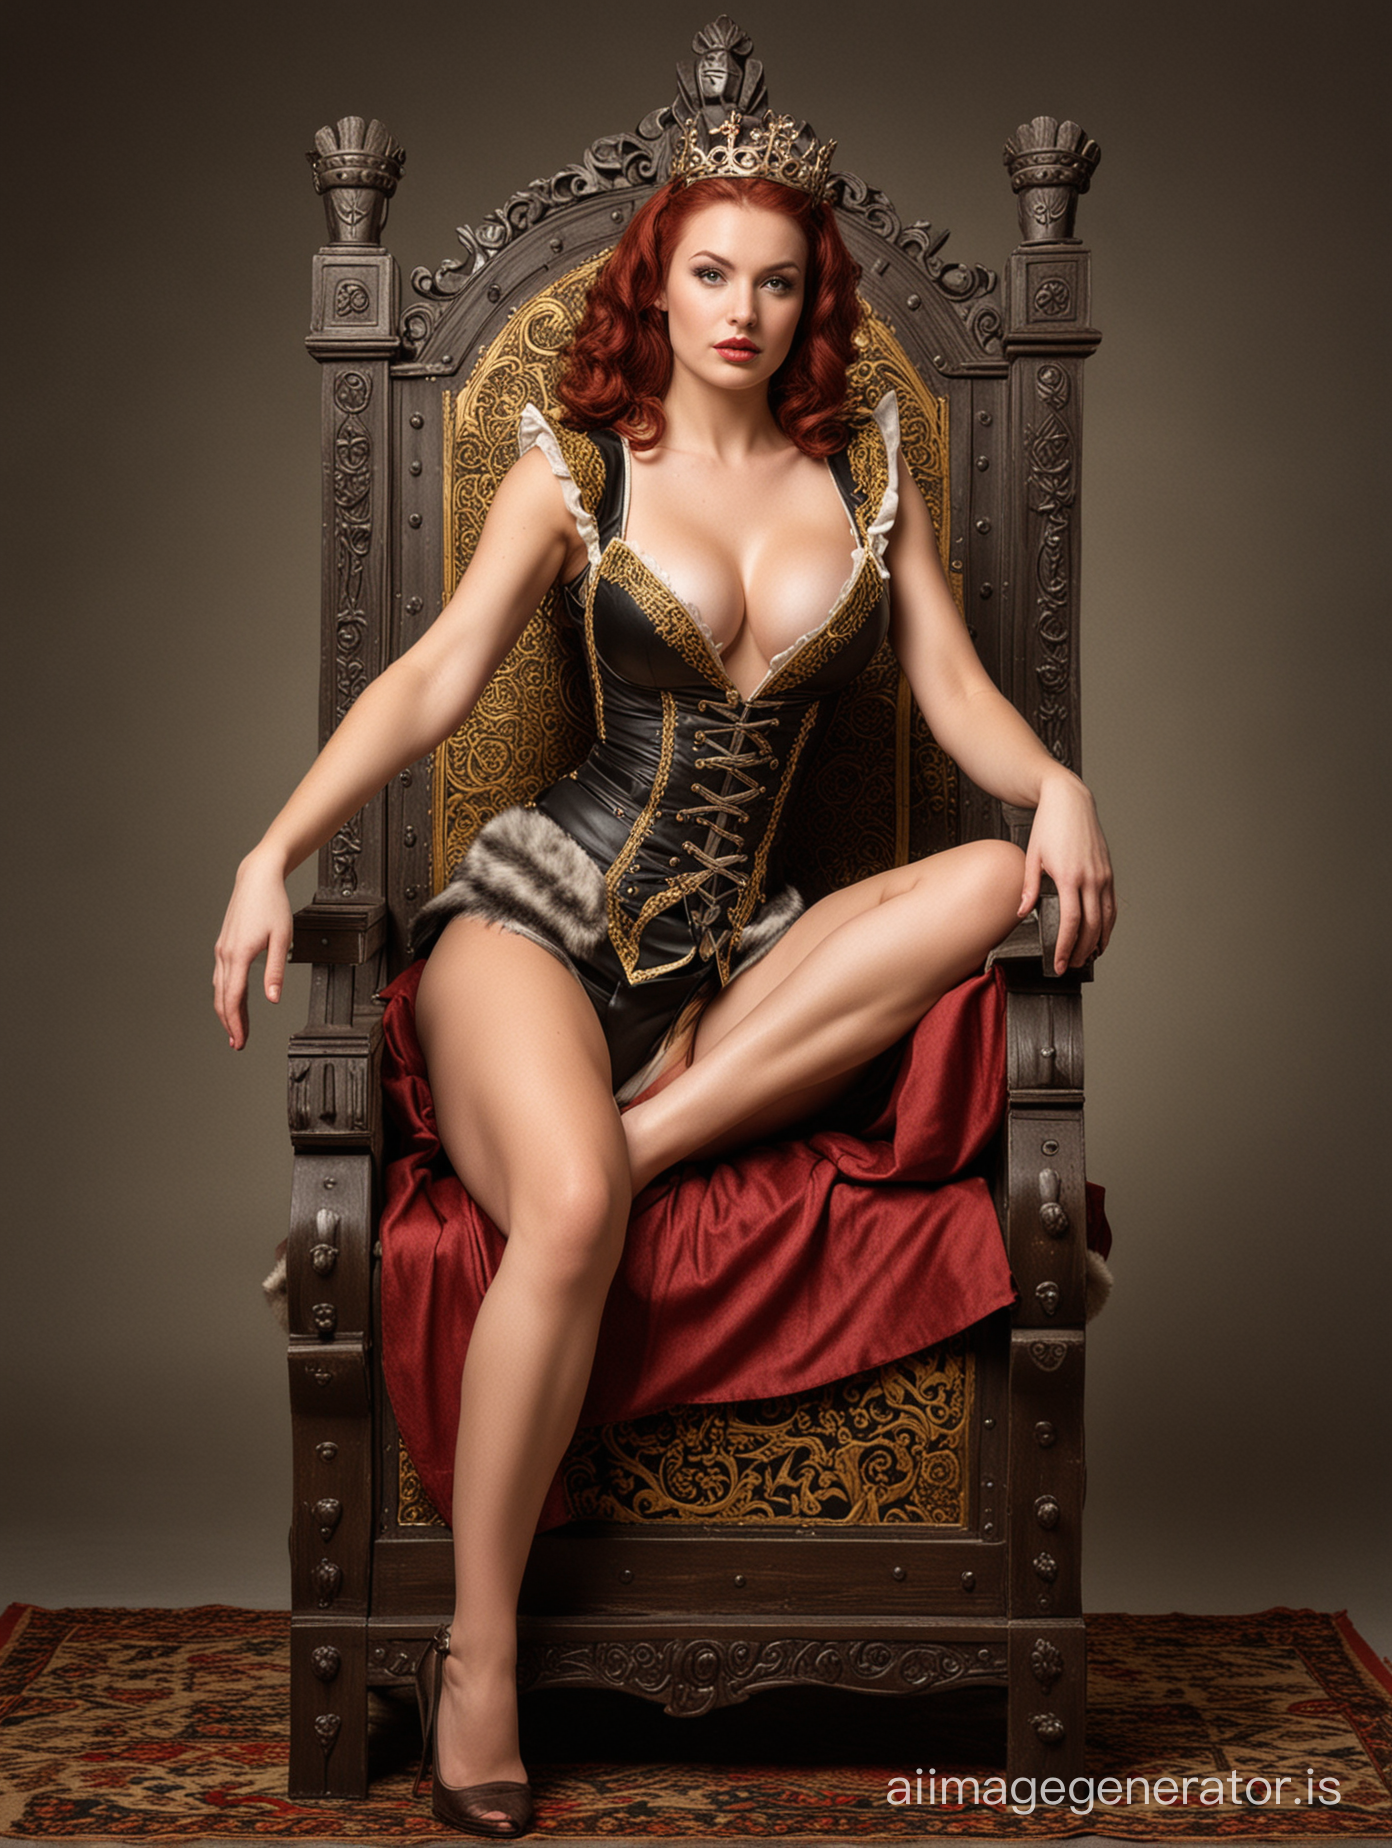  A medieval pinup model posing on a throne